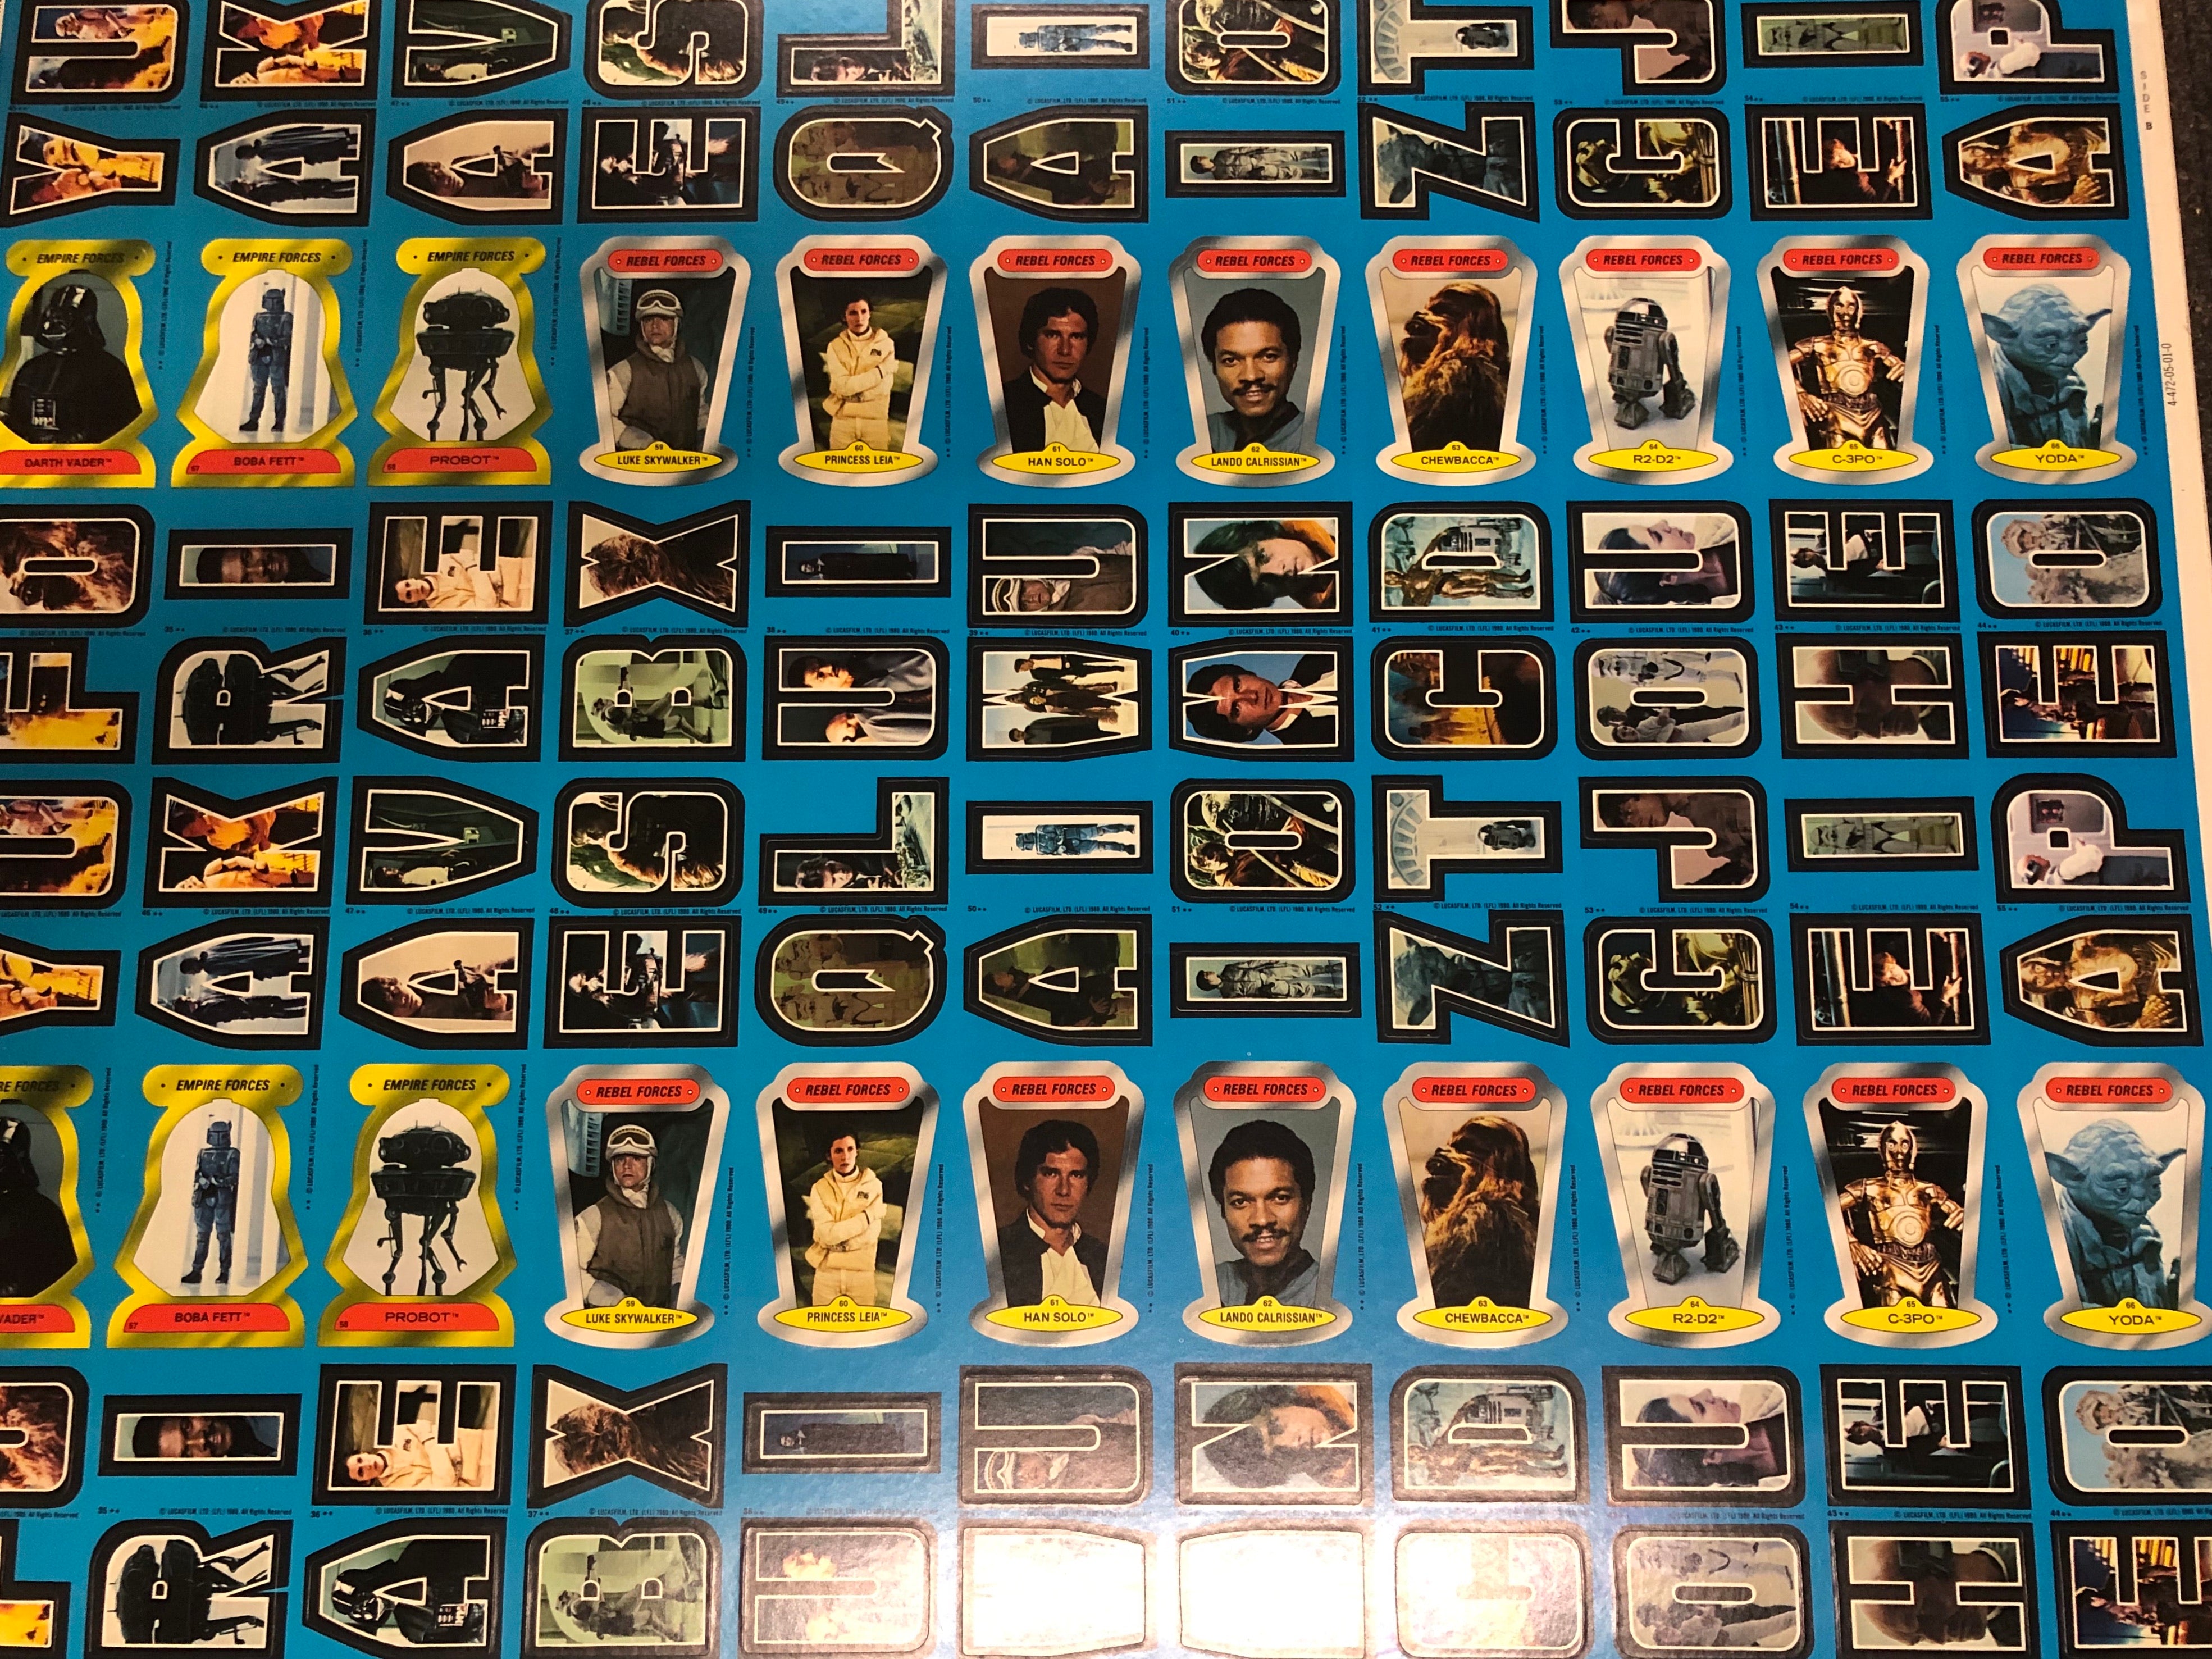 1981 Empire Strikes back series 2 stickers rare uncut cards sheet